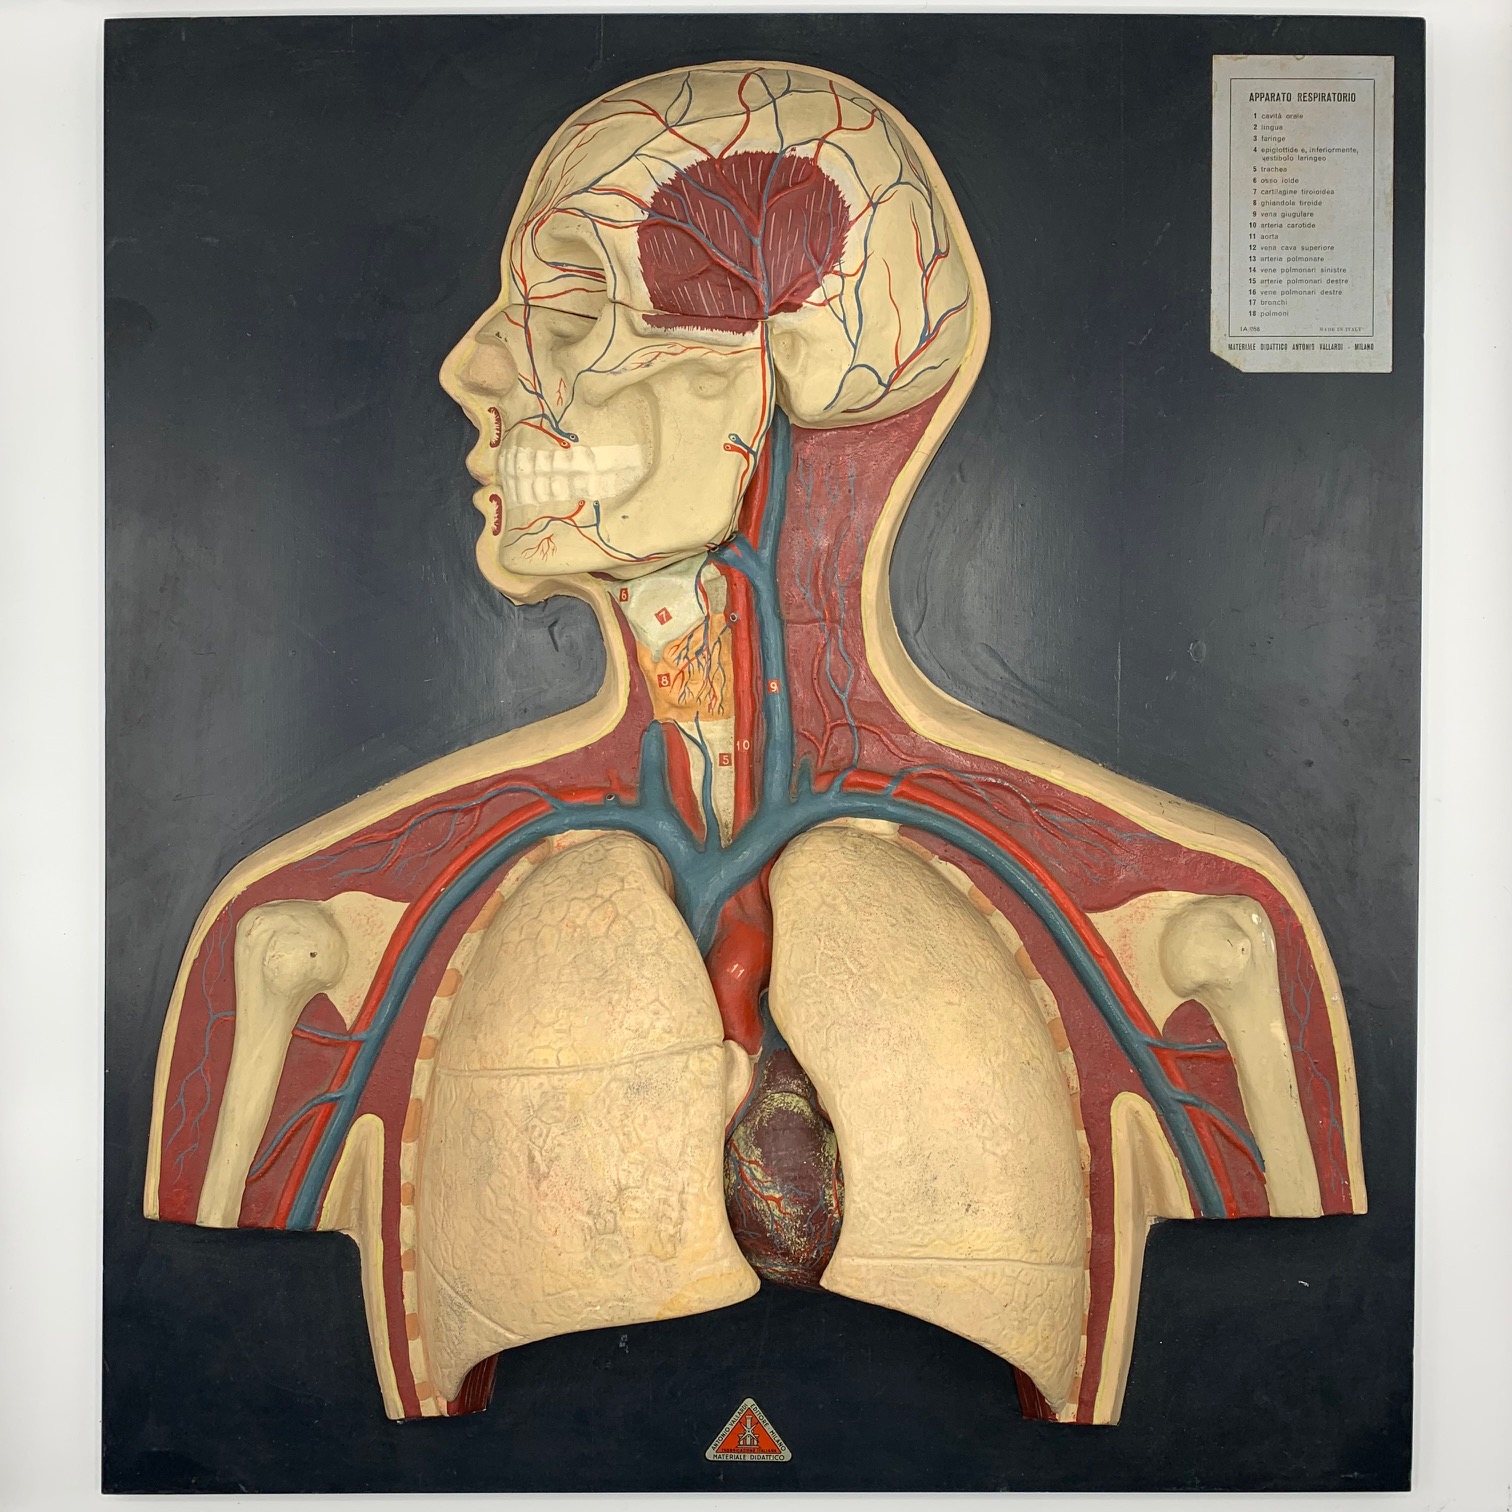 Italian anatomical model of the respiratory system, ca. 1930’s